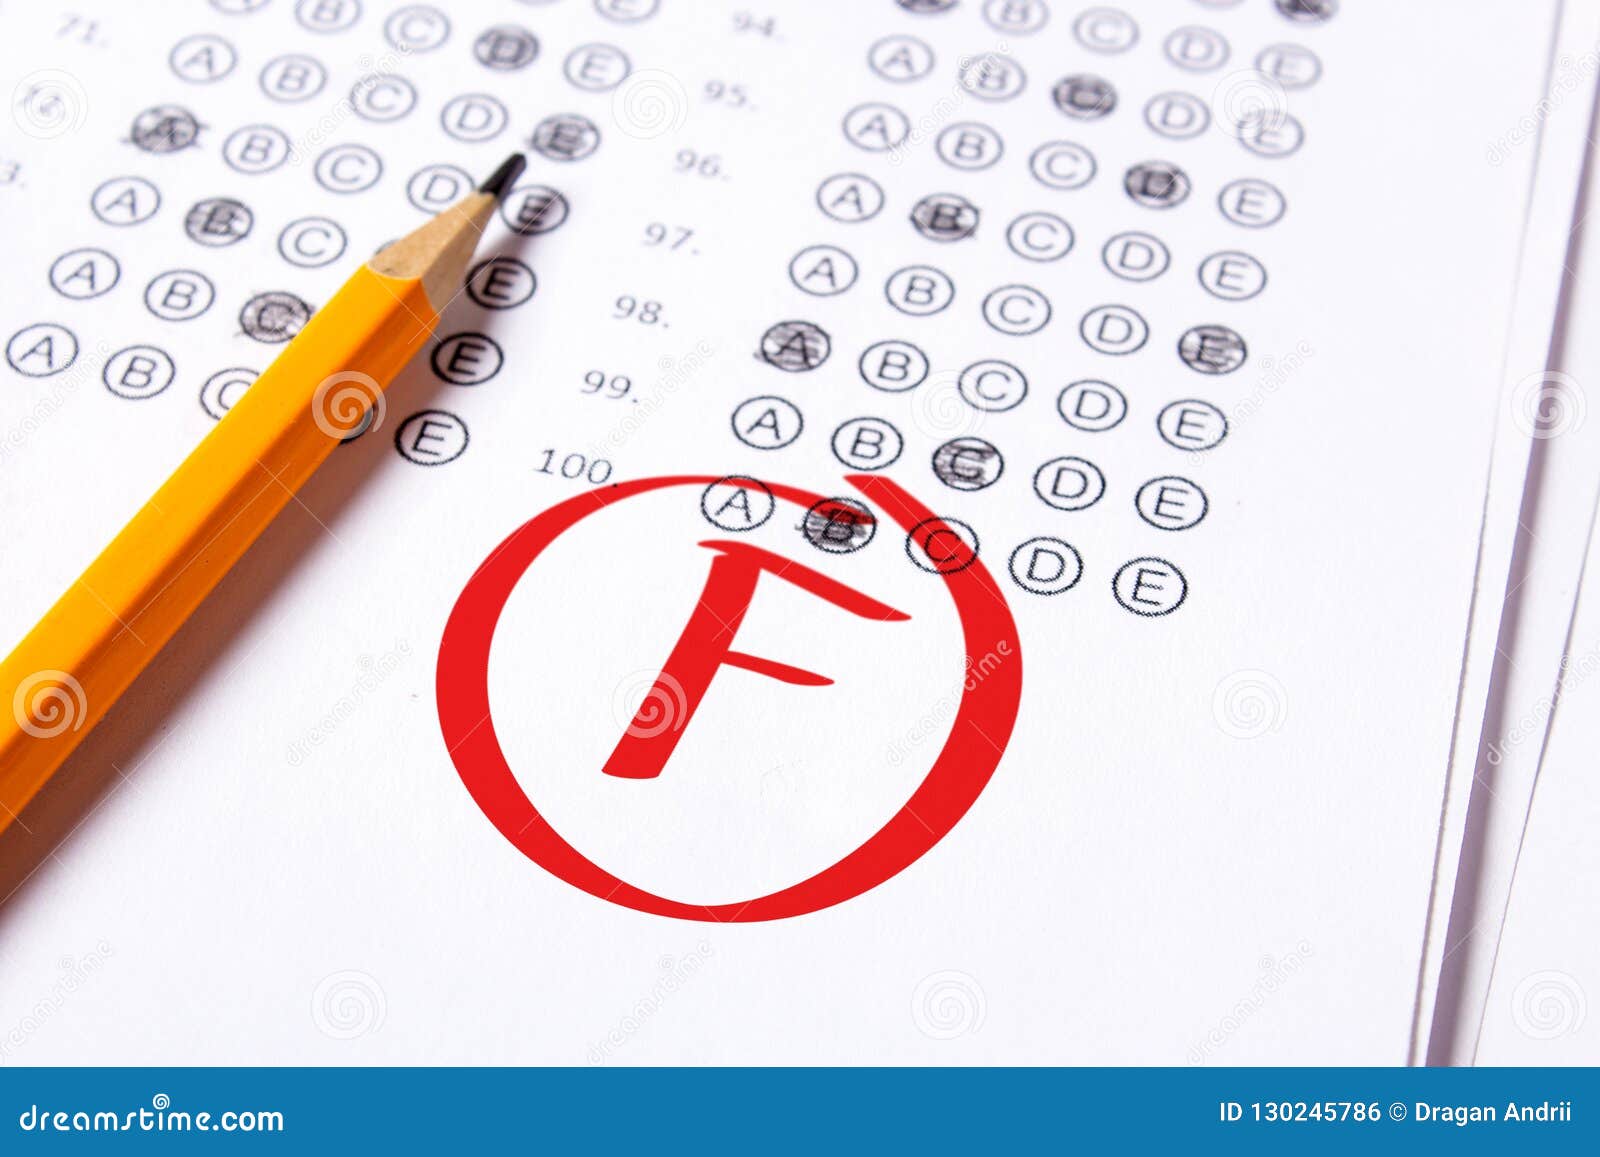 bad grade f is written with red pen on the tests